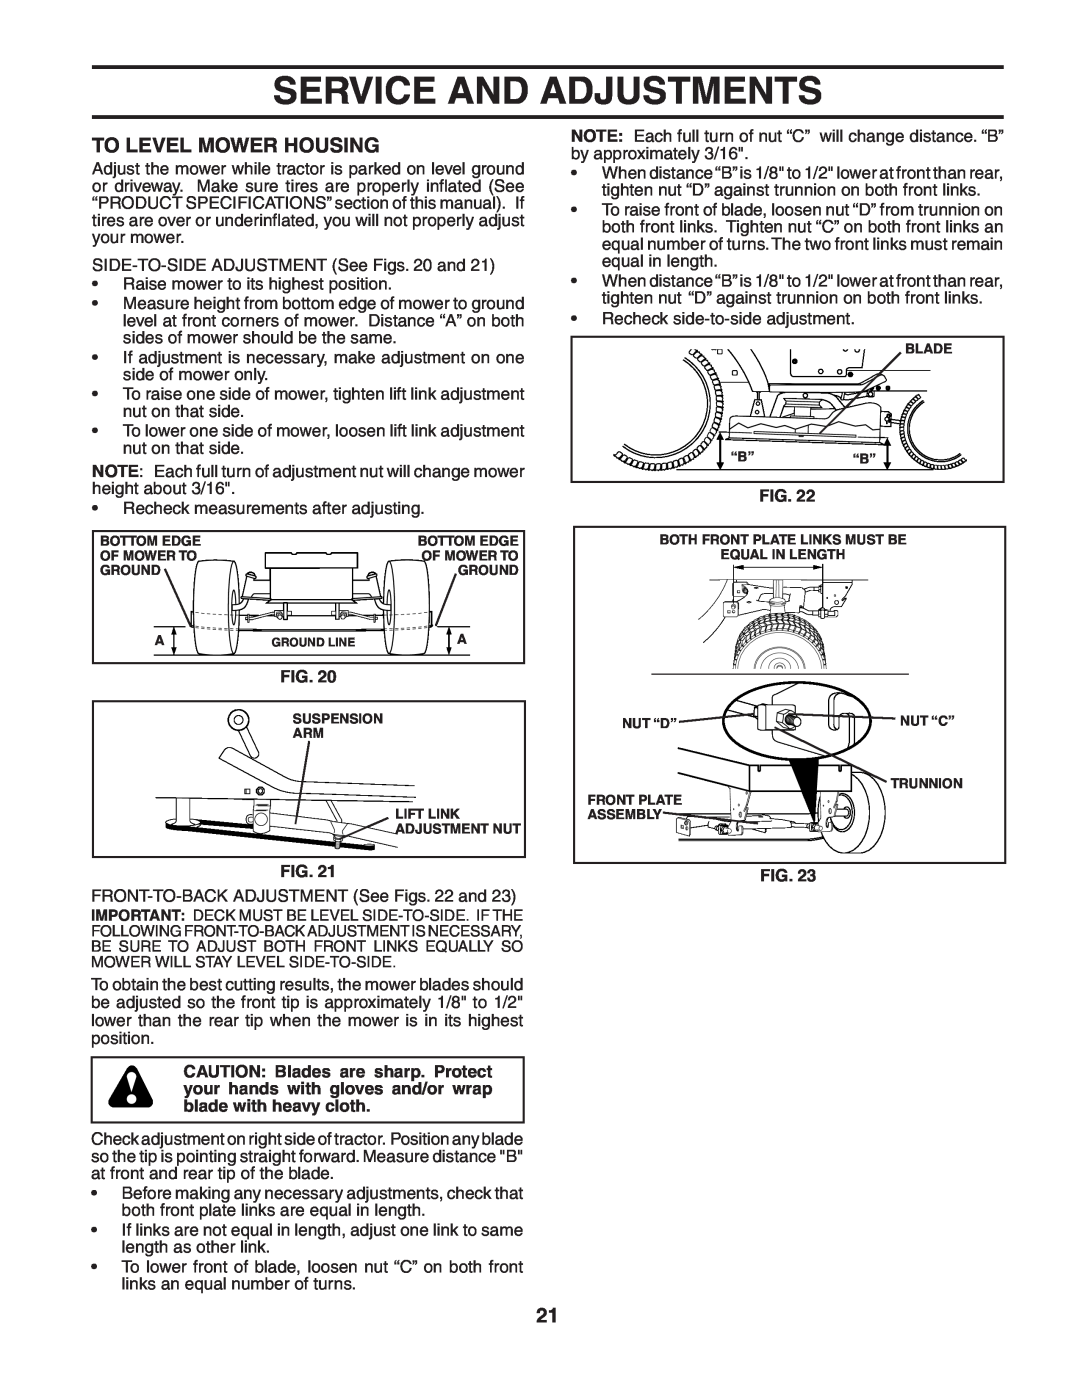 Husqvarna YTH2548 owner manual To Level Mower Housing, Service And Adjustments 